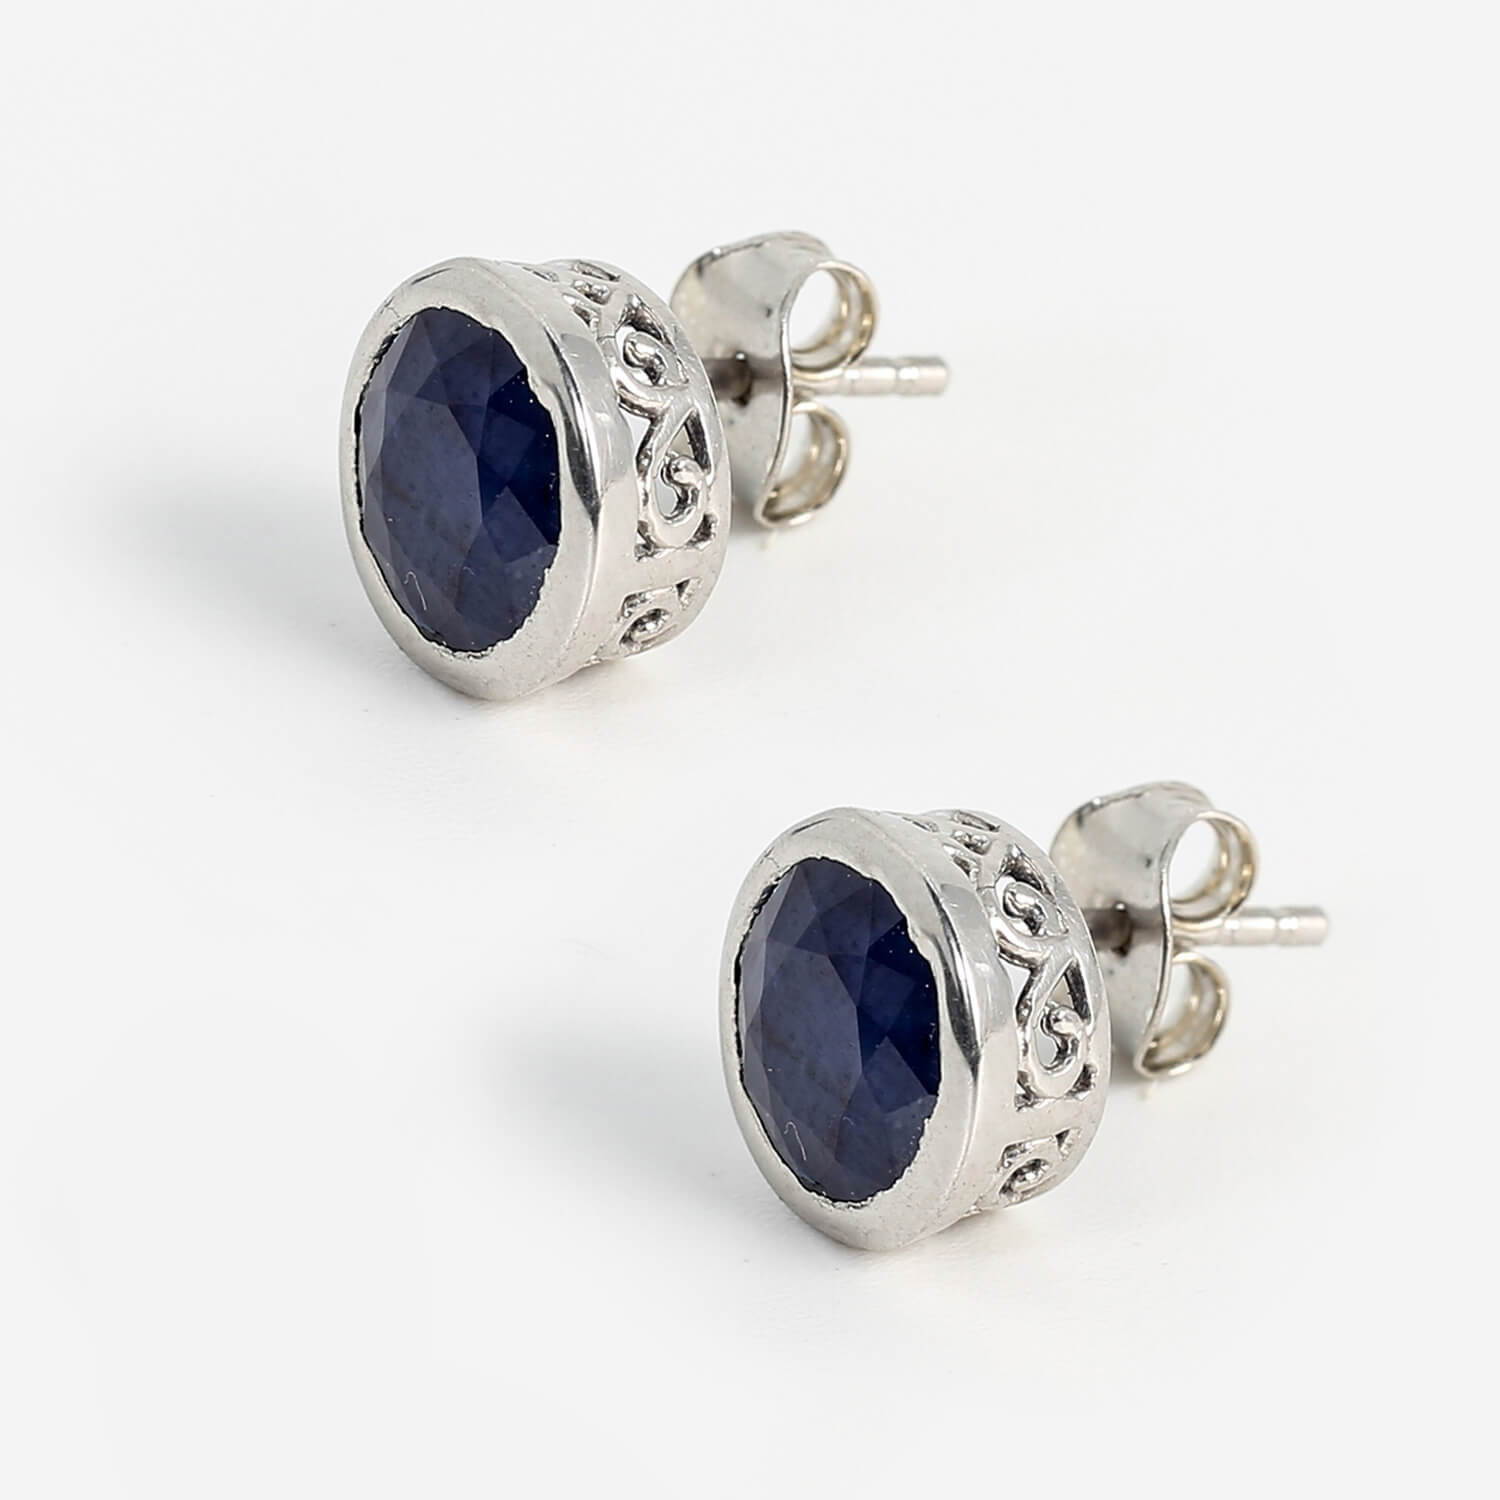 Diffused blue sapphire